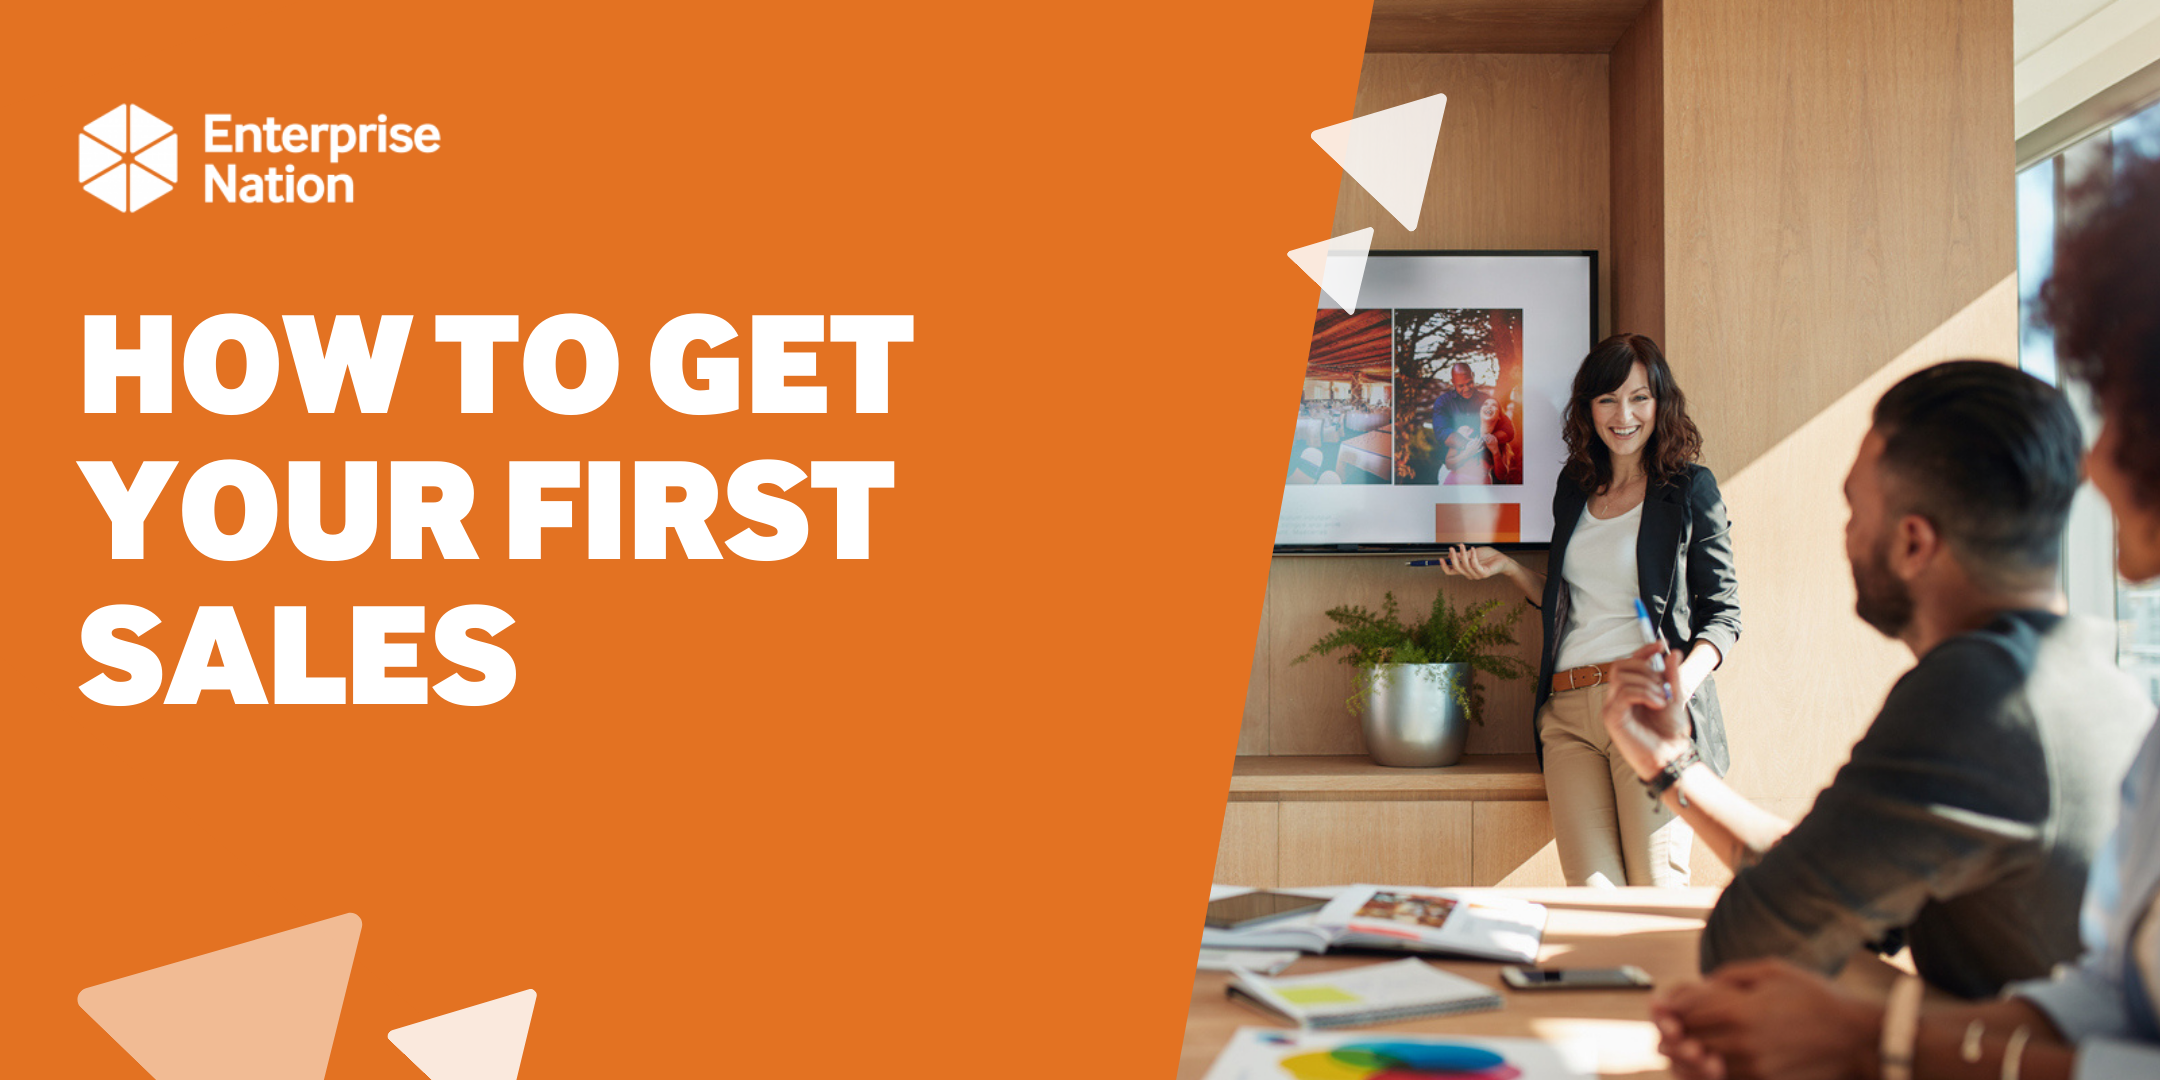 How to get your first sales as a new business